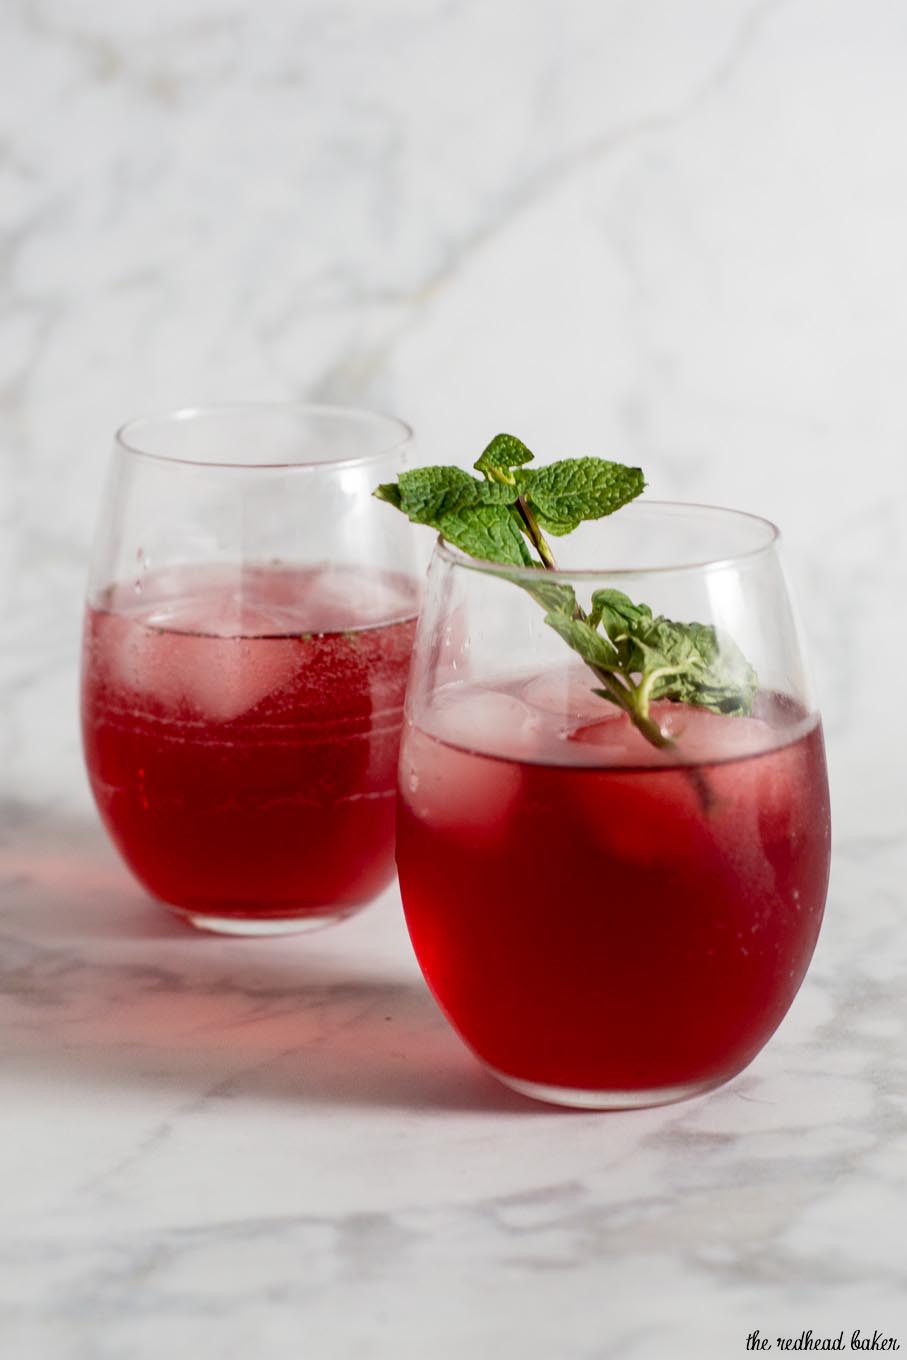 Pomegranate green tea mojitos are a Moroccan twist on a Cuban cocktail. The classic mint-and-lime drink gets an extra flavor twist from pomegranate and green tea. 